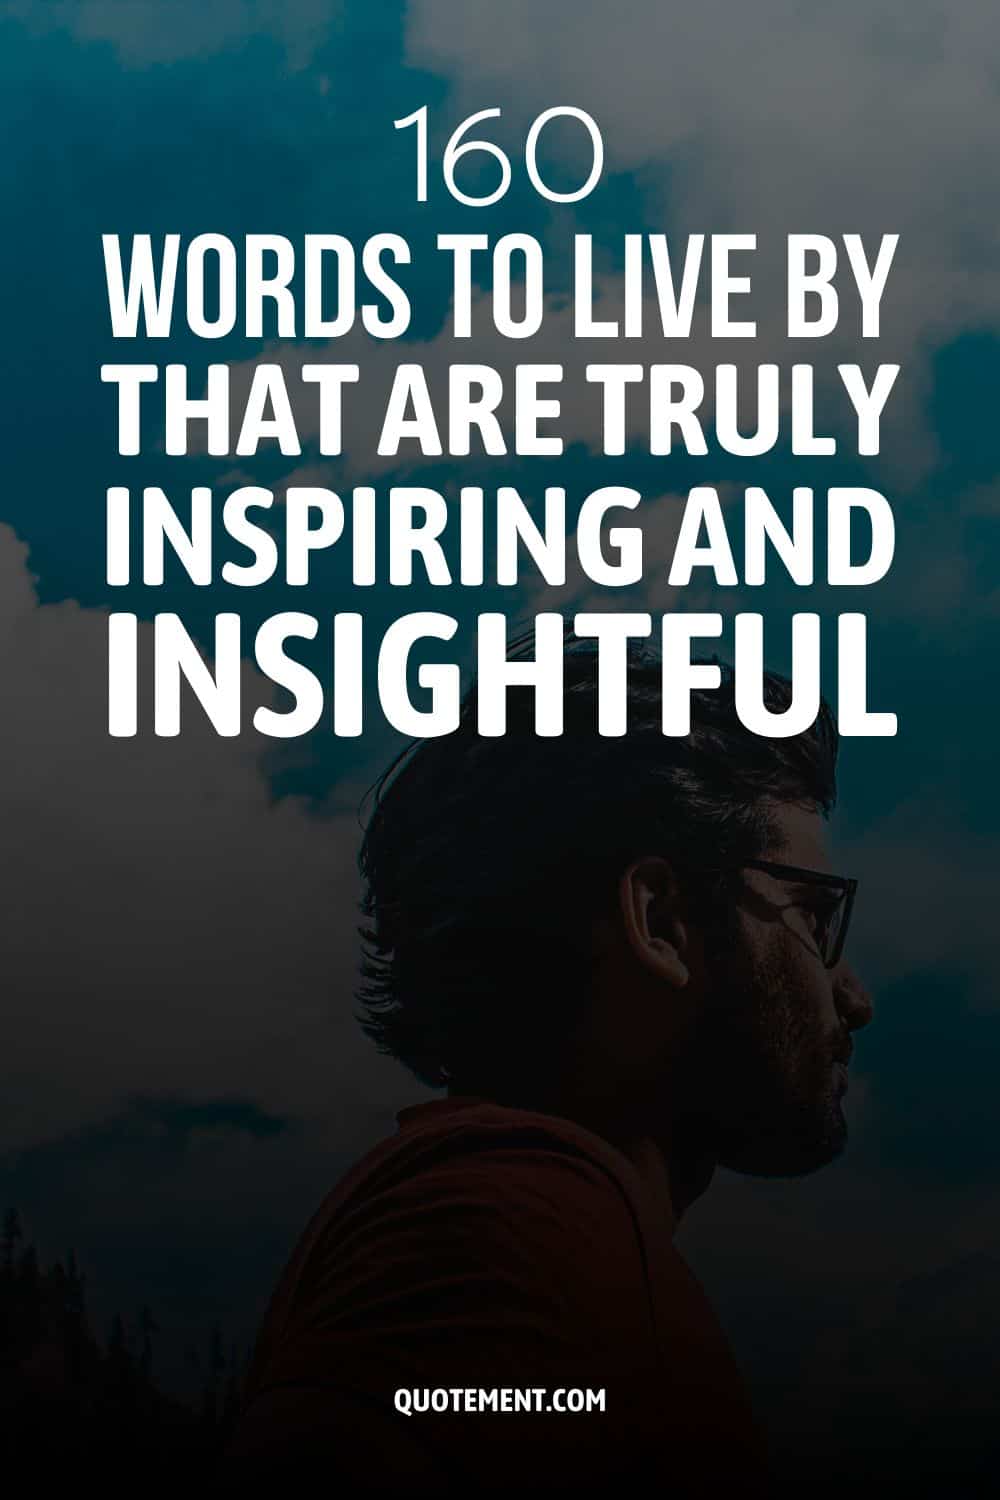 160 Words To Live By That Are Truly Inspiring And Insightful